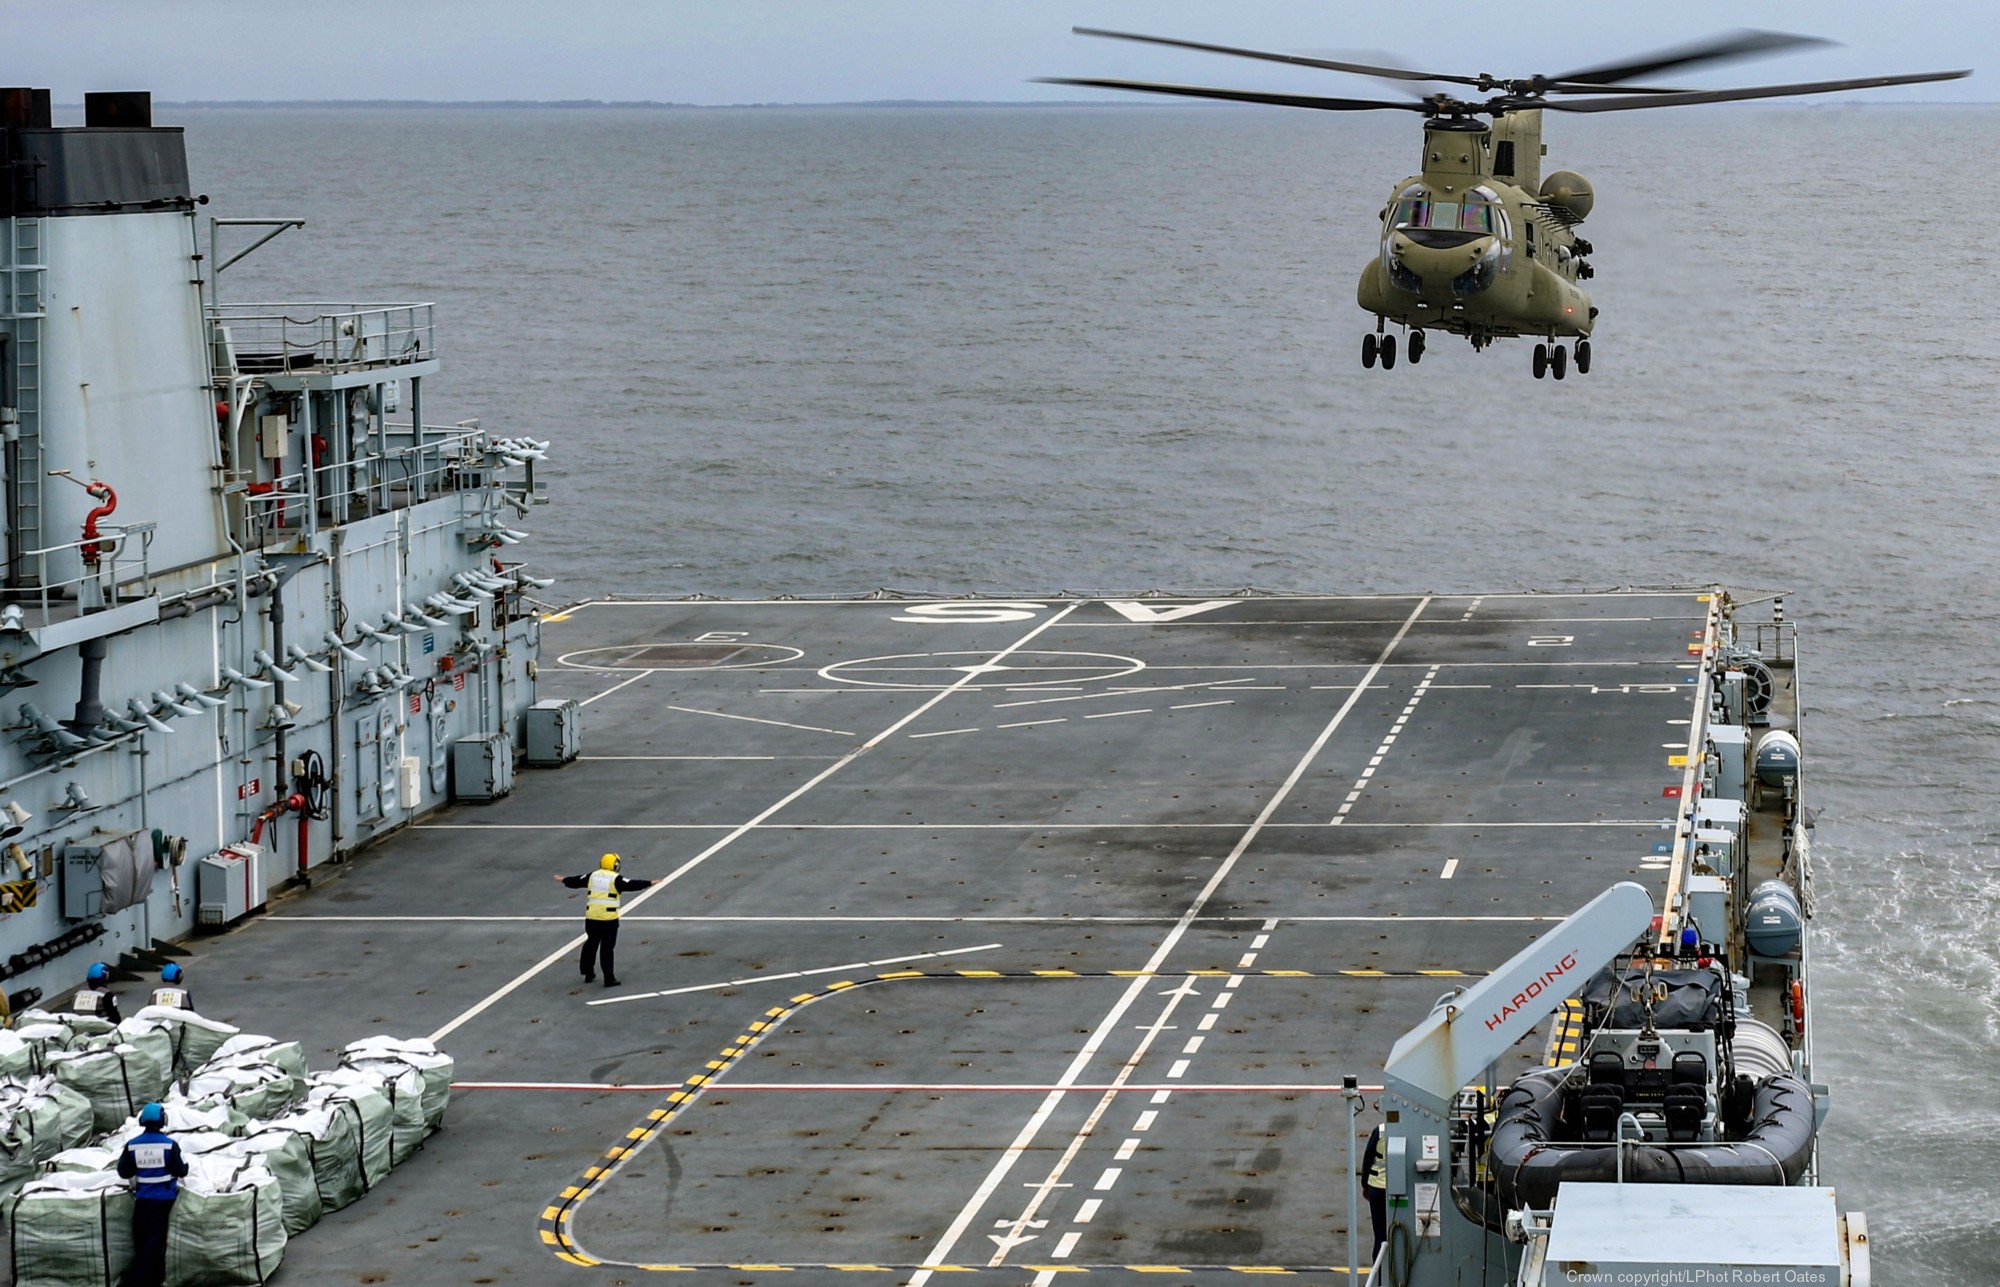 a 135 rfa argus casualty receiving ship support royal fleet auxilary navy 02 chinook helicopter